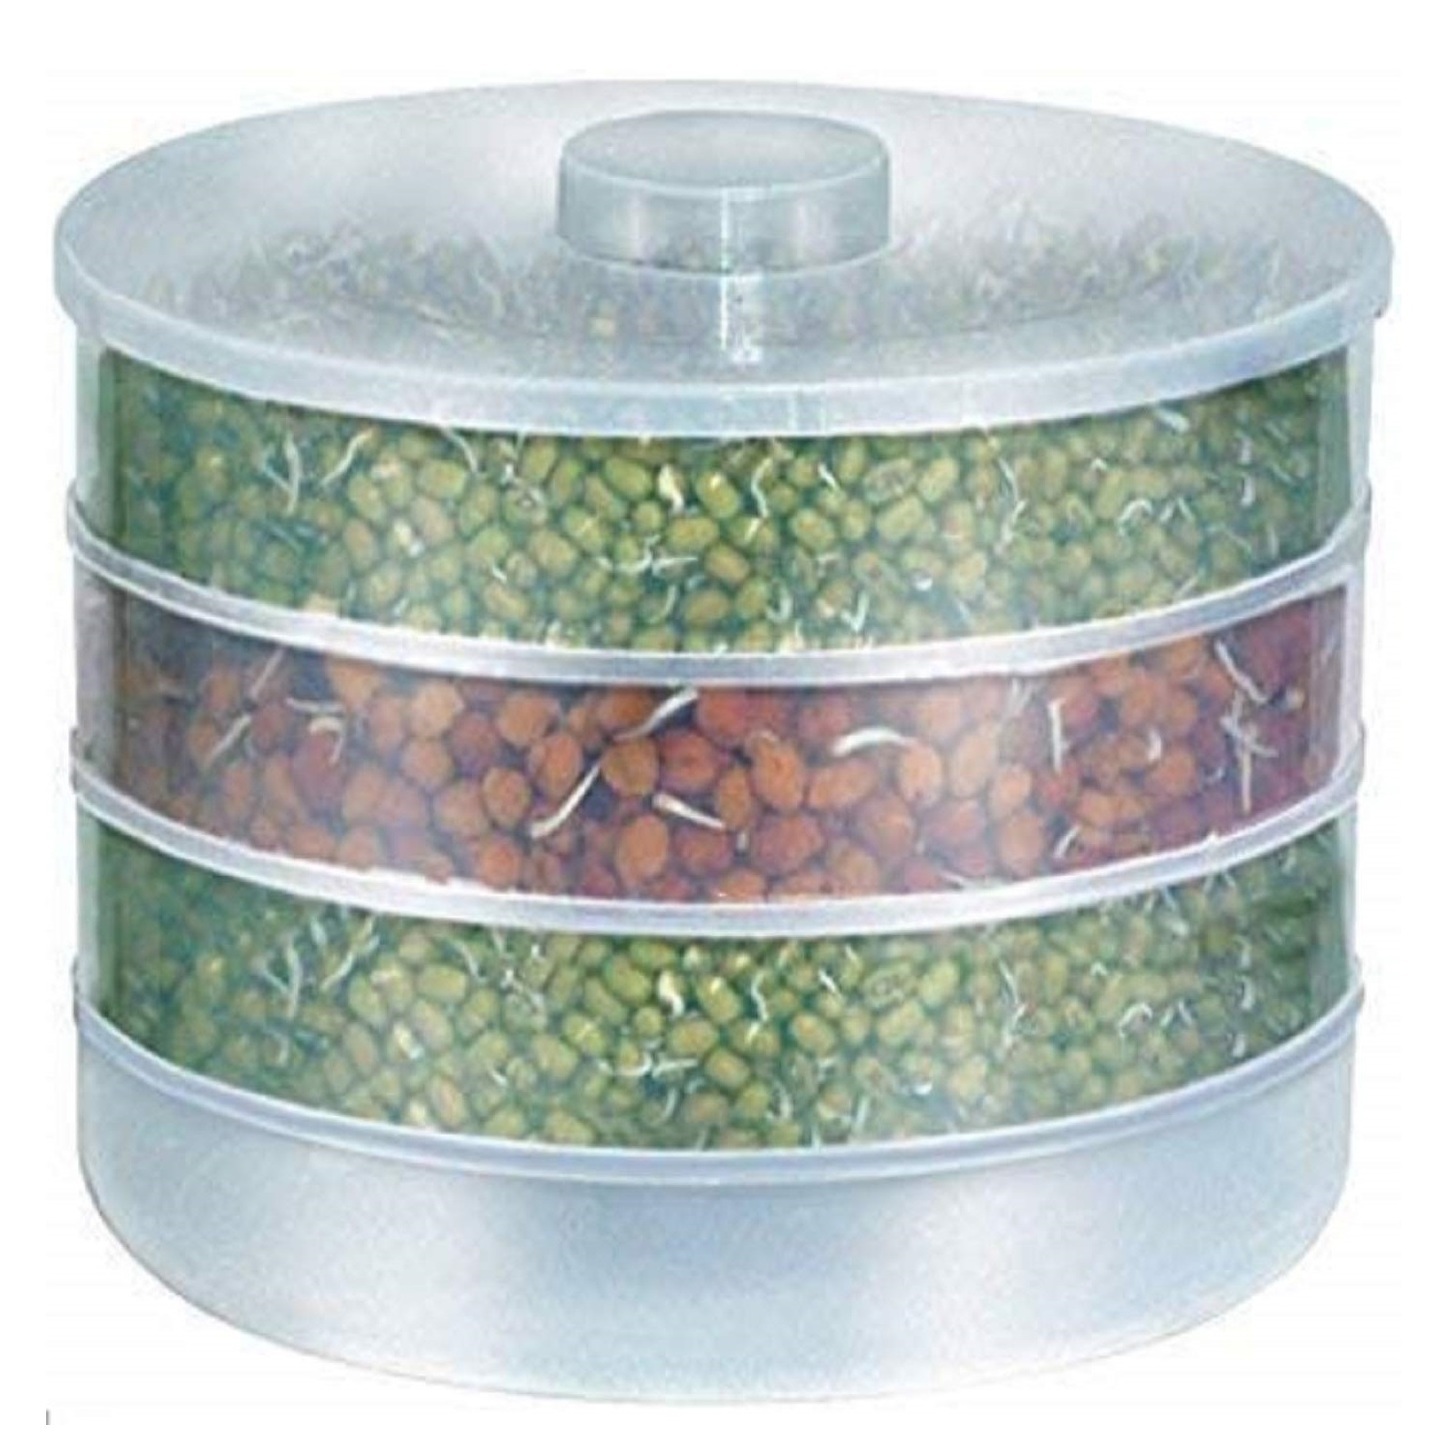 Easy Sprout Maker with 4 Compartments